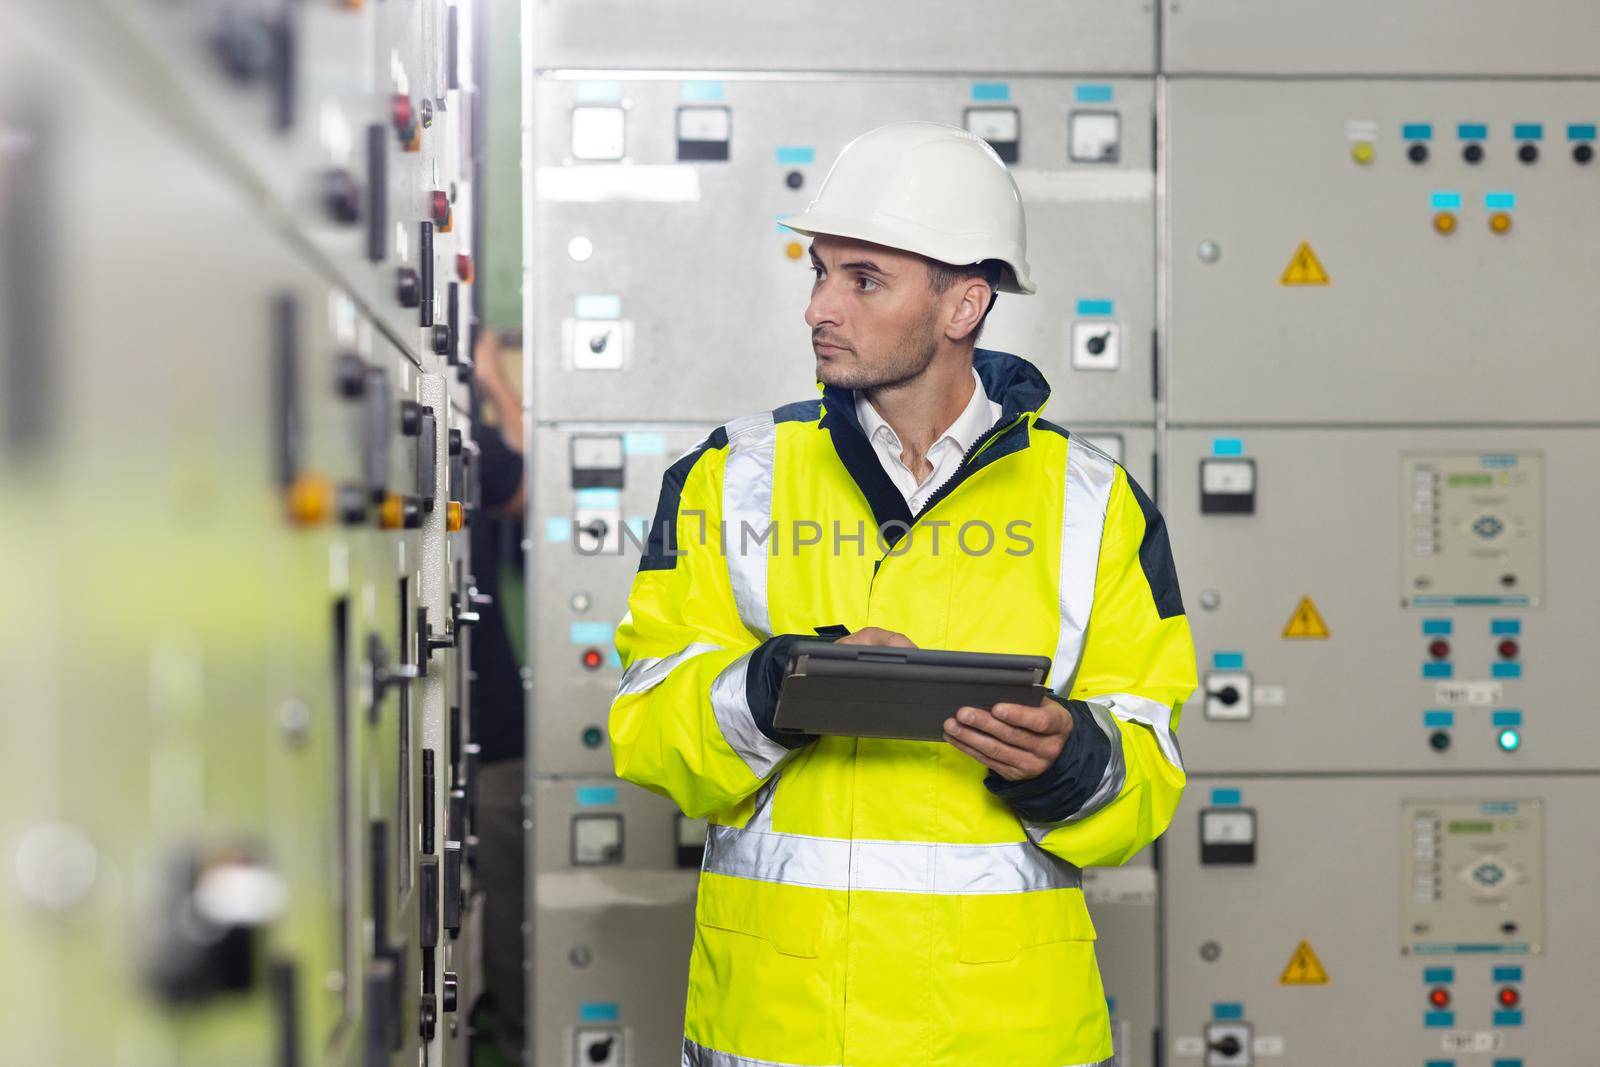 Technician inspect to control panel screen system for generate electricity of factory in manufacture industrial. Man electrical engineer hold tablet monitoring electrical system in control room.